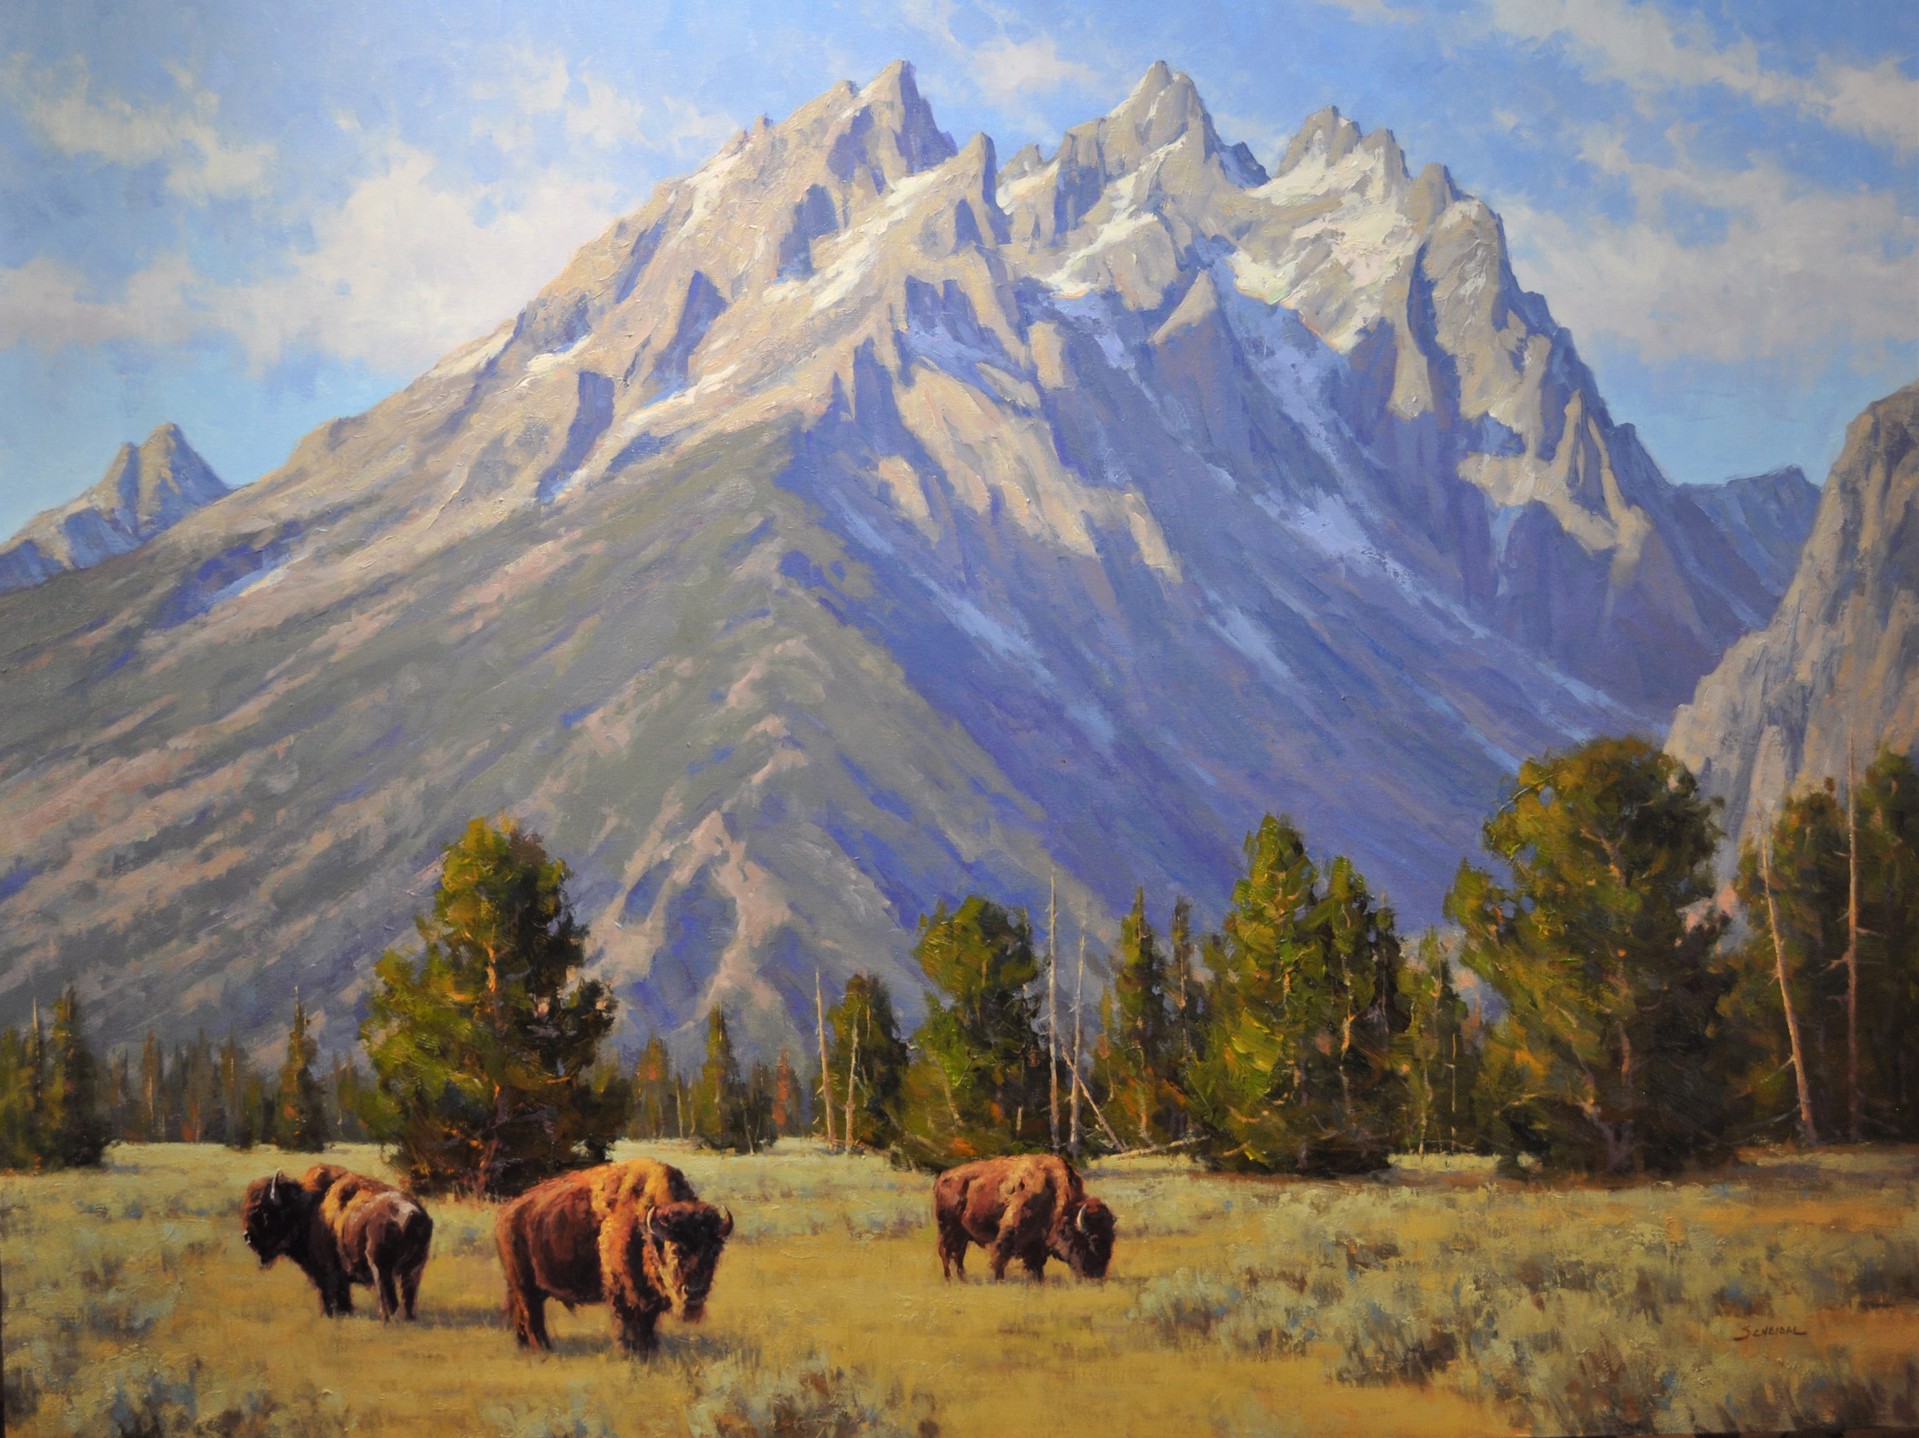 AFTERNOON IN THE GRAND TETON by Greg Scheibel